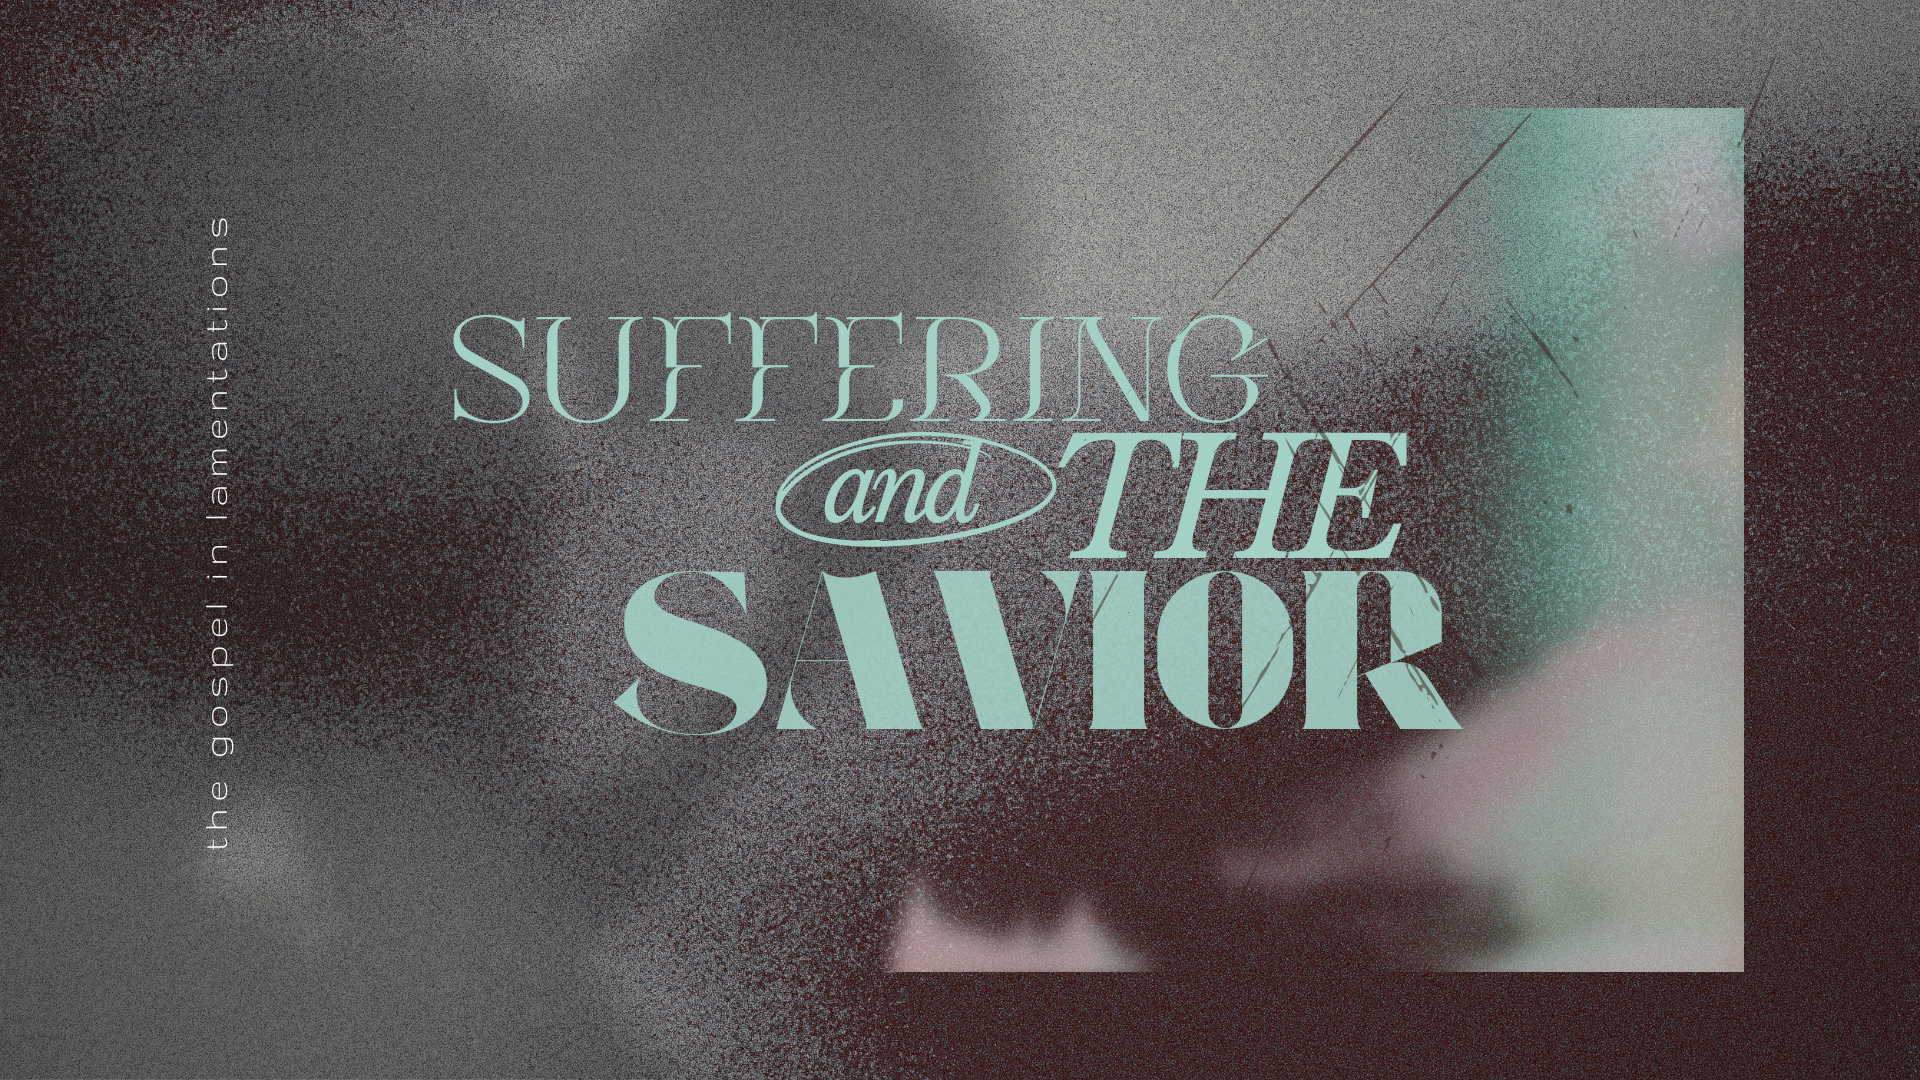 Suffering And the Savior: How Silent